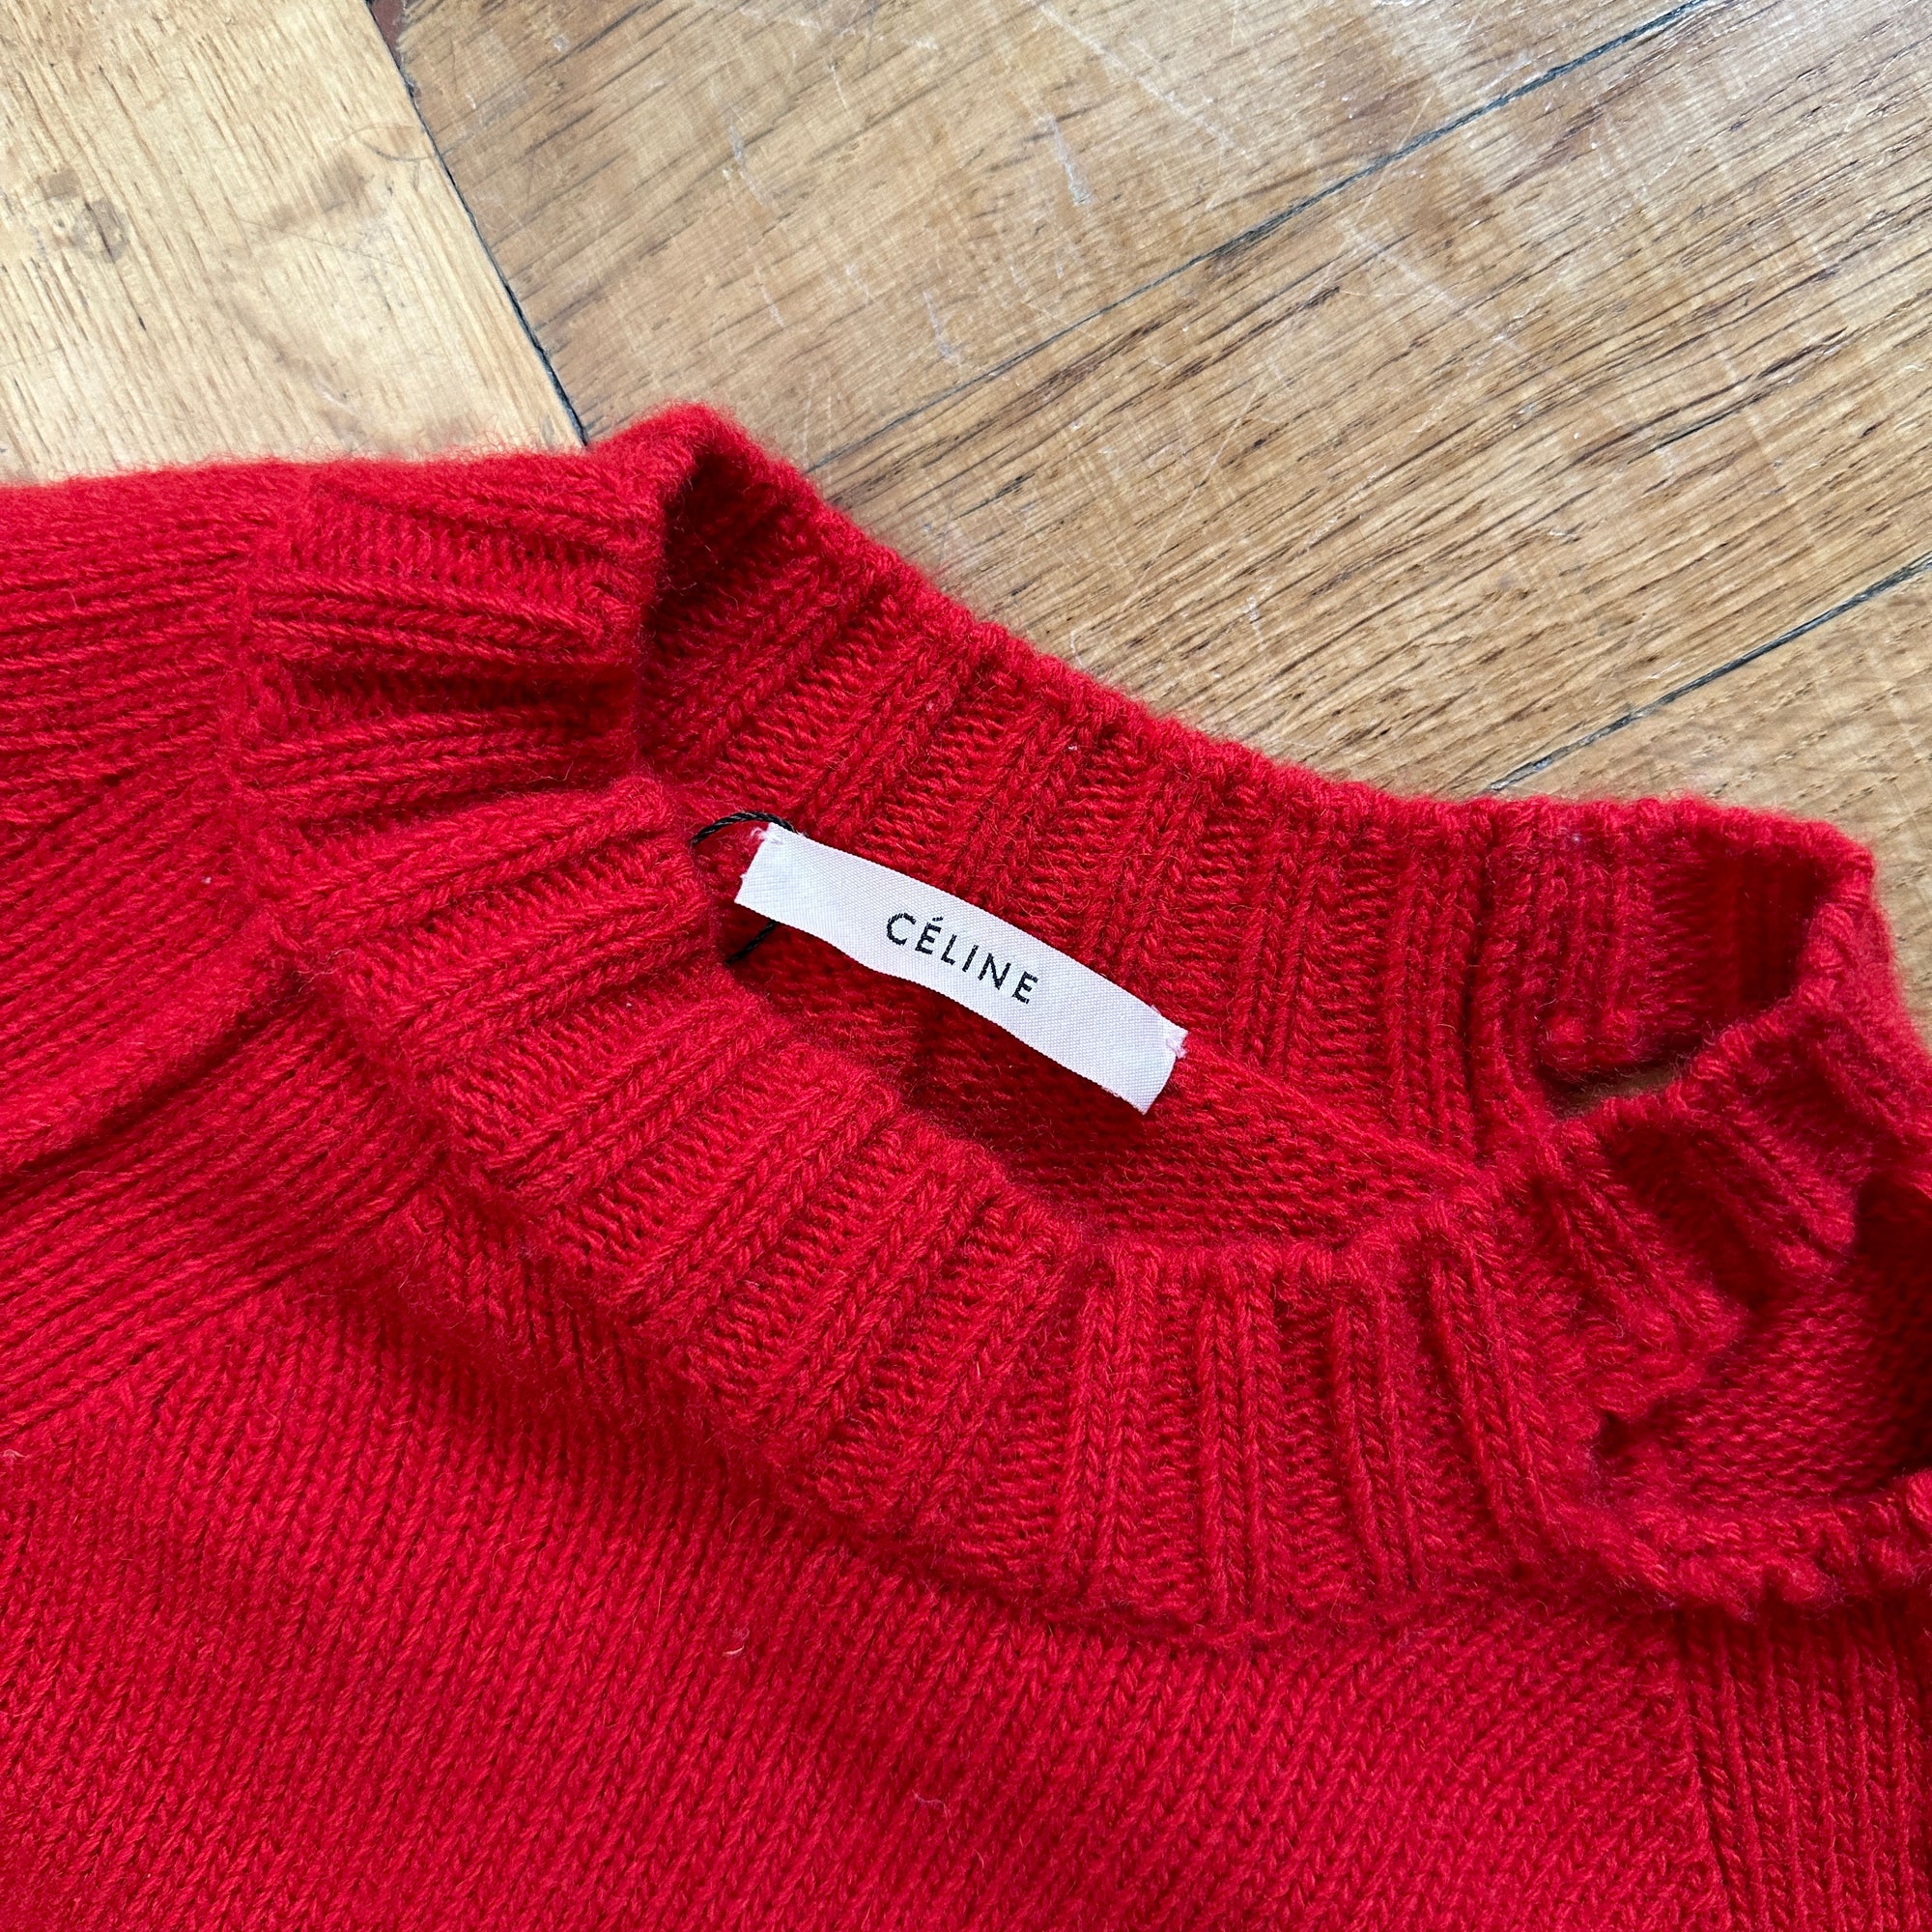 Céline by Phoebe Philo FW17 Red Destroyed Knit Sweater